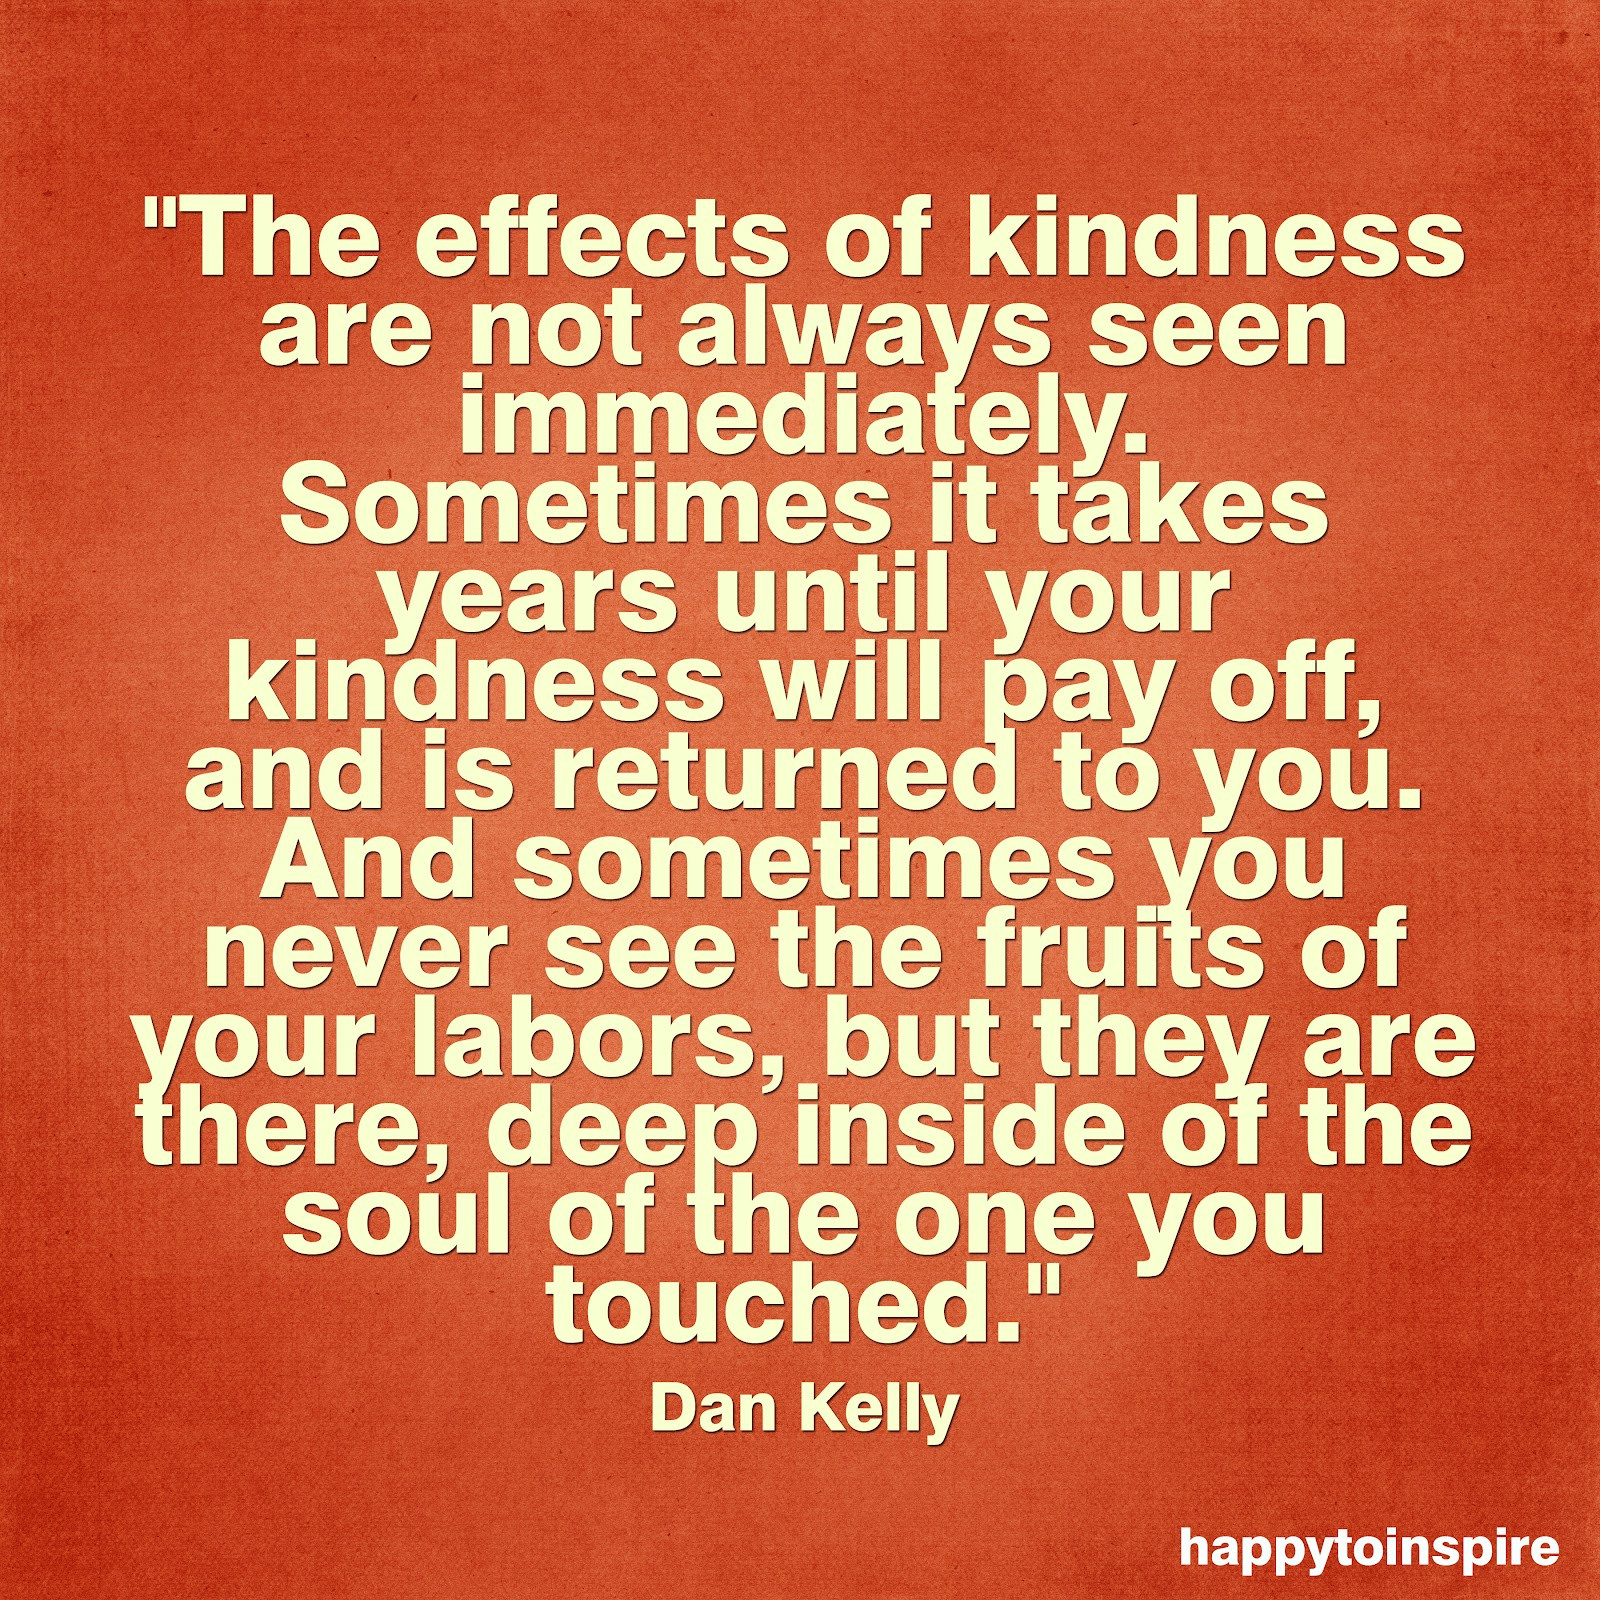 Quote About Kindness
 Happy To Inspire Quote of the Day The effects of